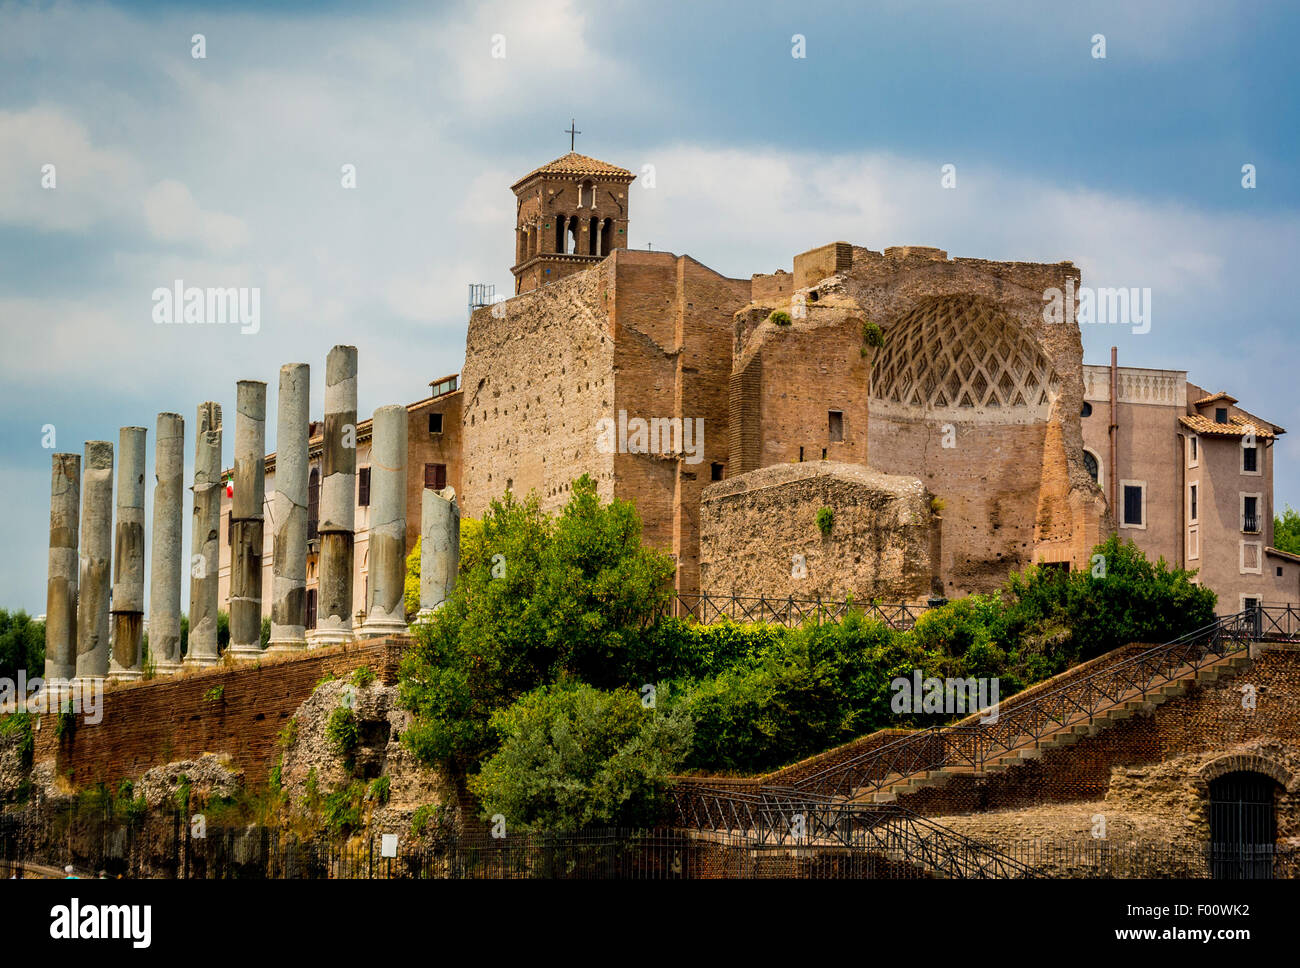 The Temple of Venus and Rome seen from the Colosseum. Rome, Italy. Stock Photo